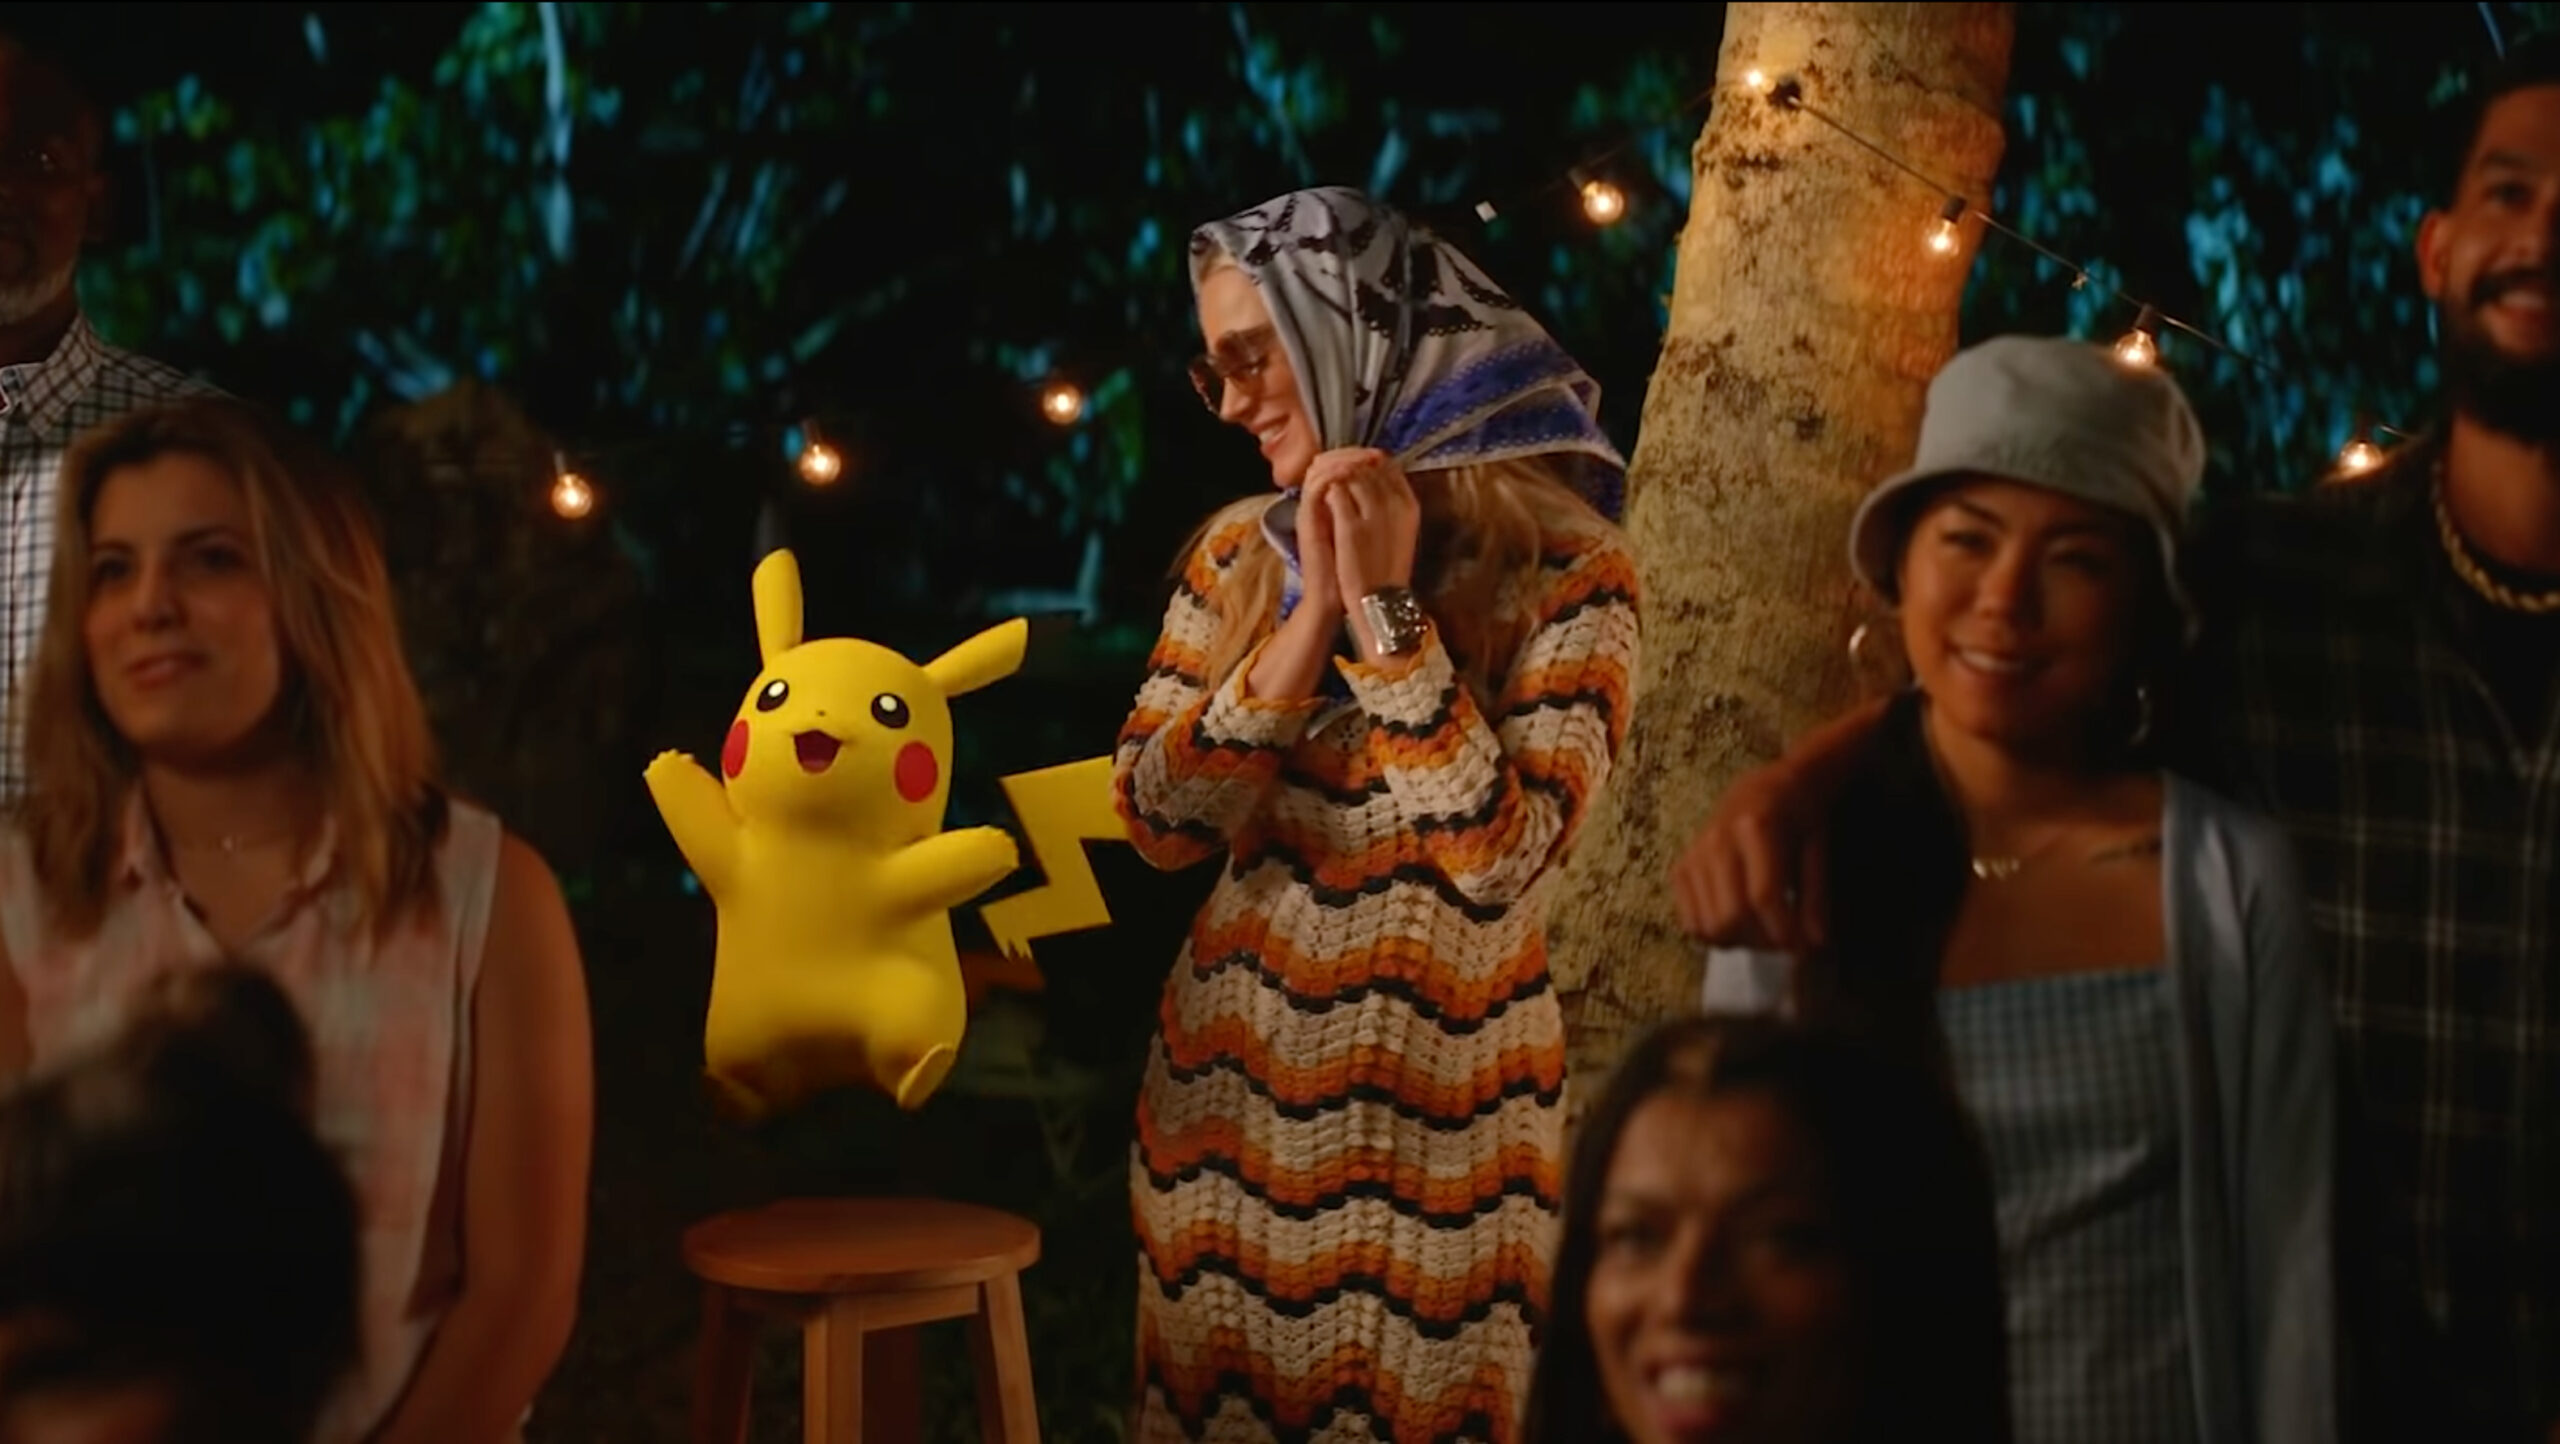 Pikachu with Katy Perry wearing a disguise